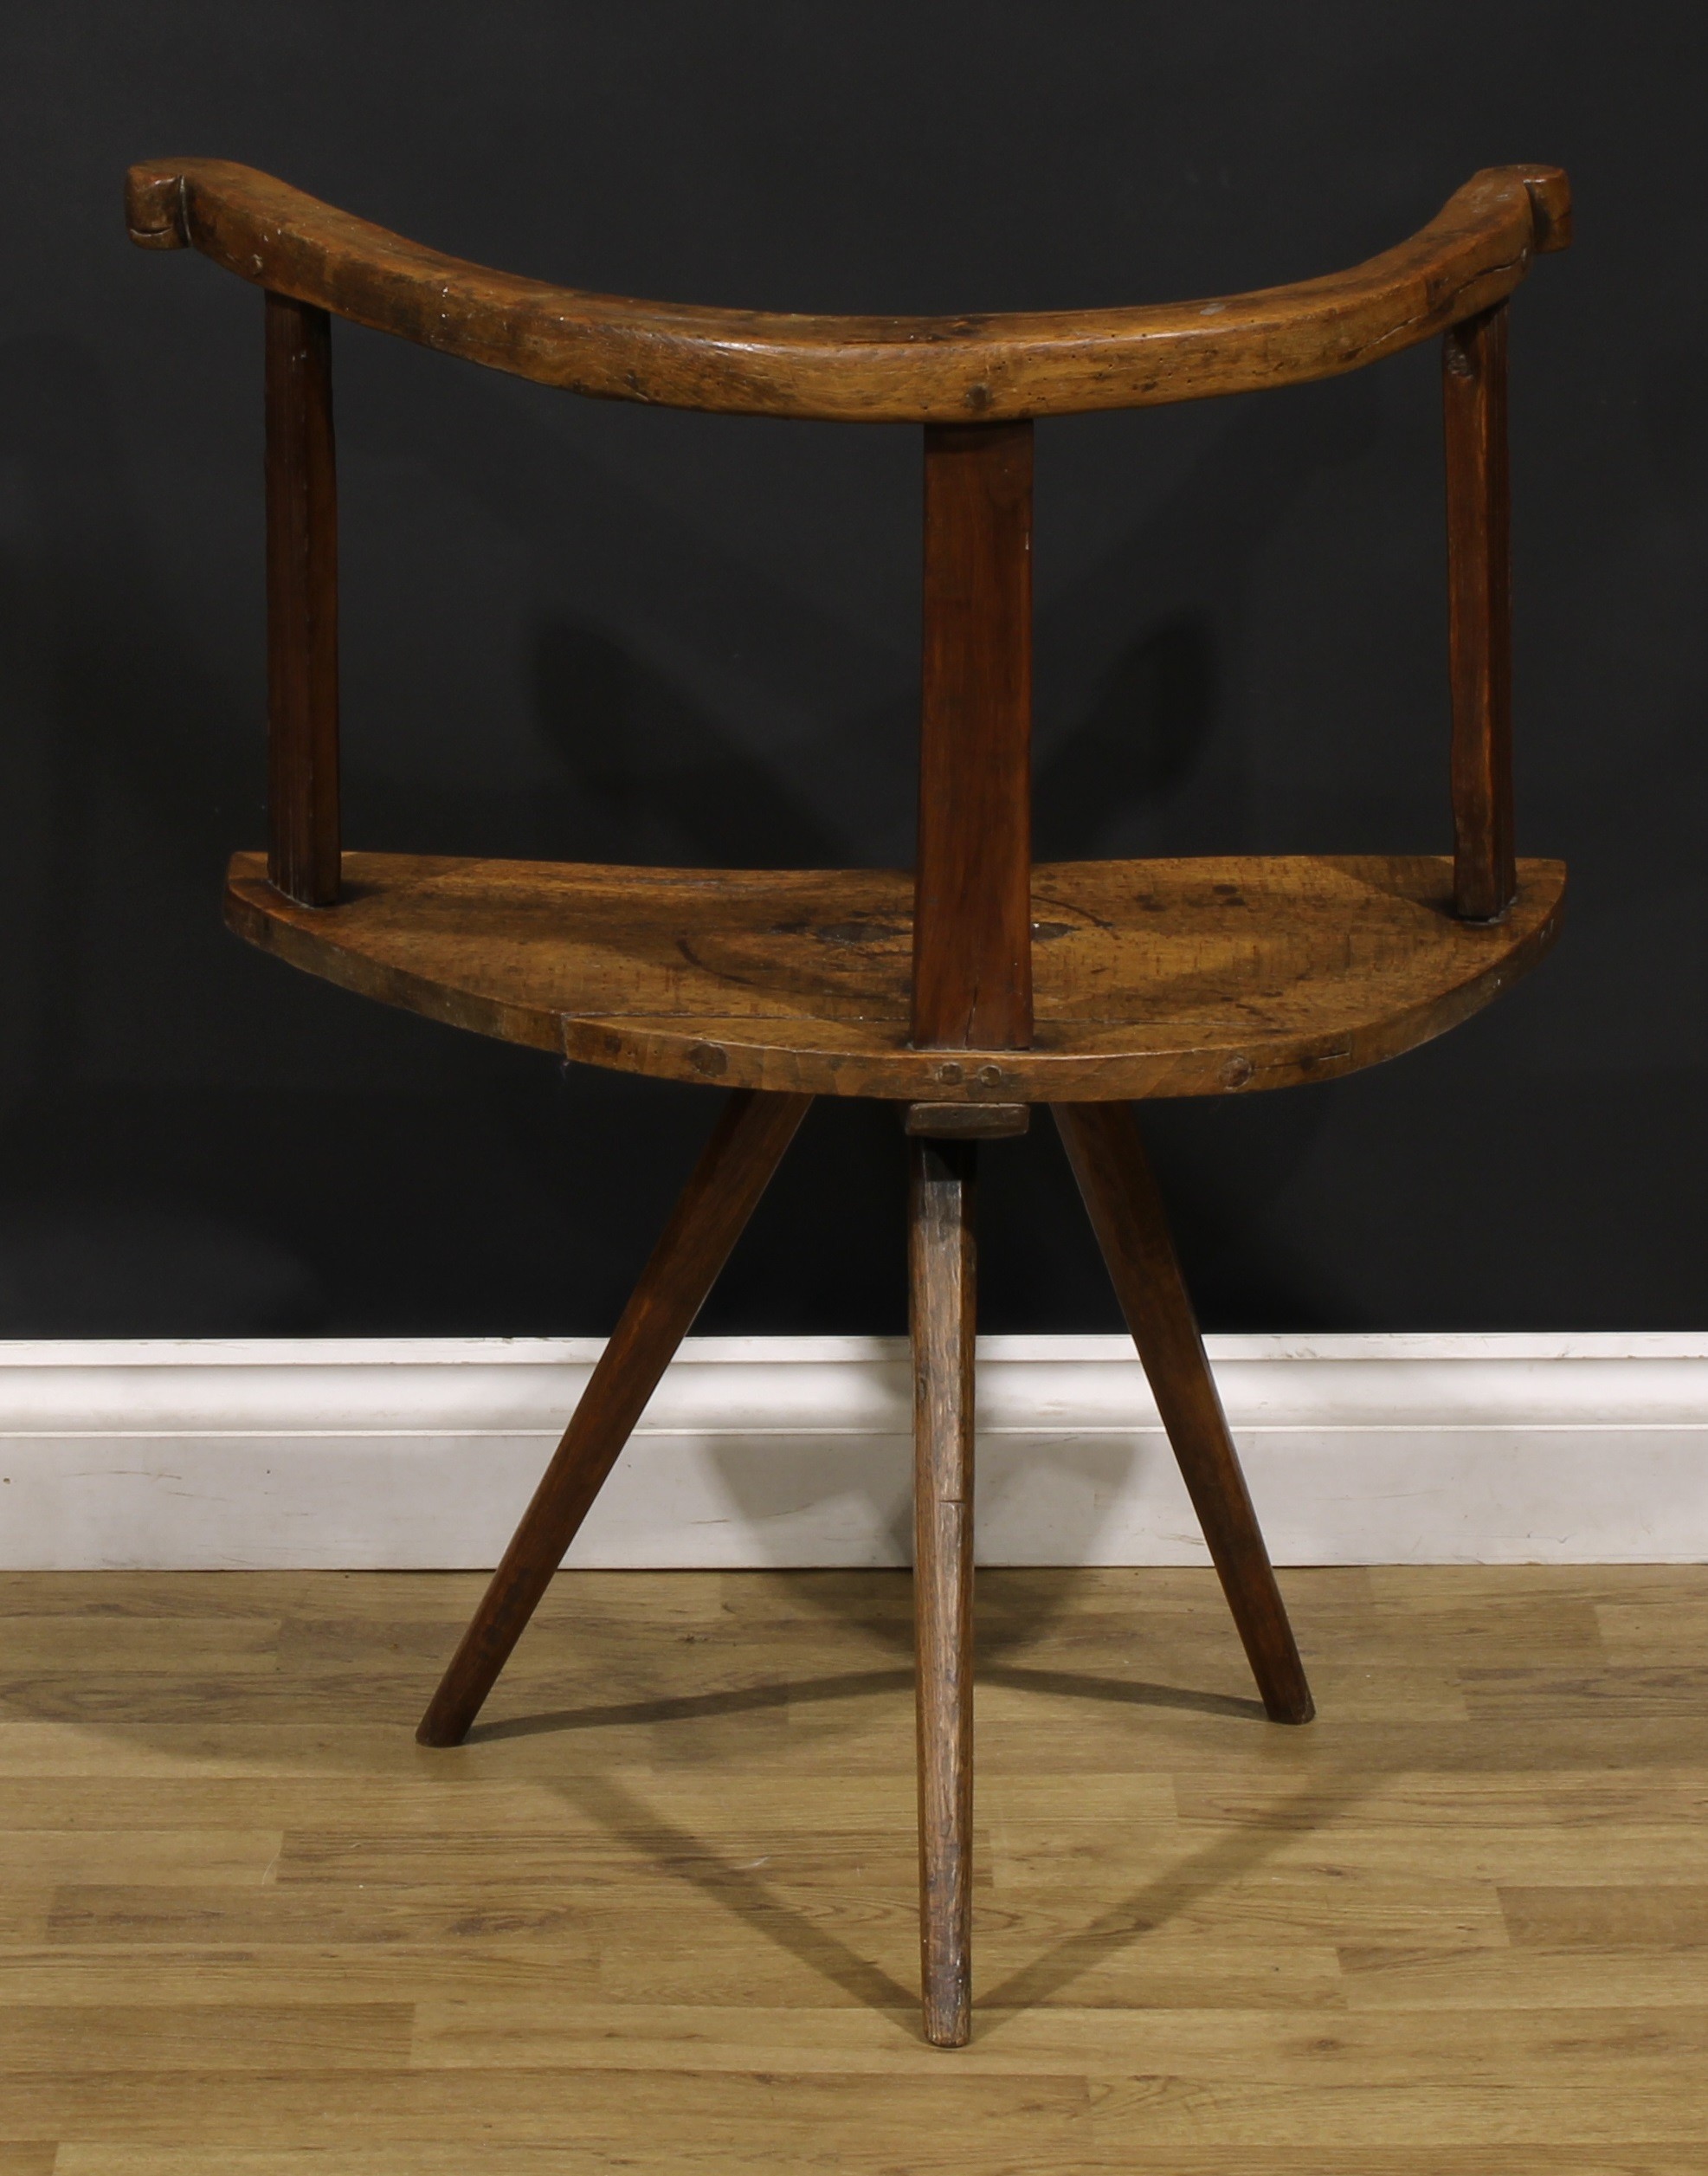 A 19th century primitive and vernacular indigenous timber cricket-form hedge or famine chair, - Image 4 of 4